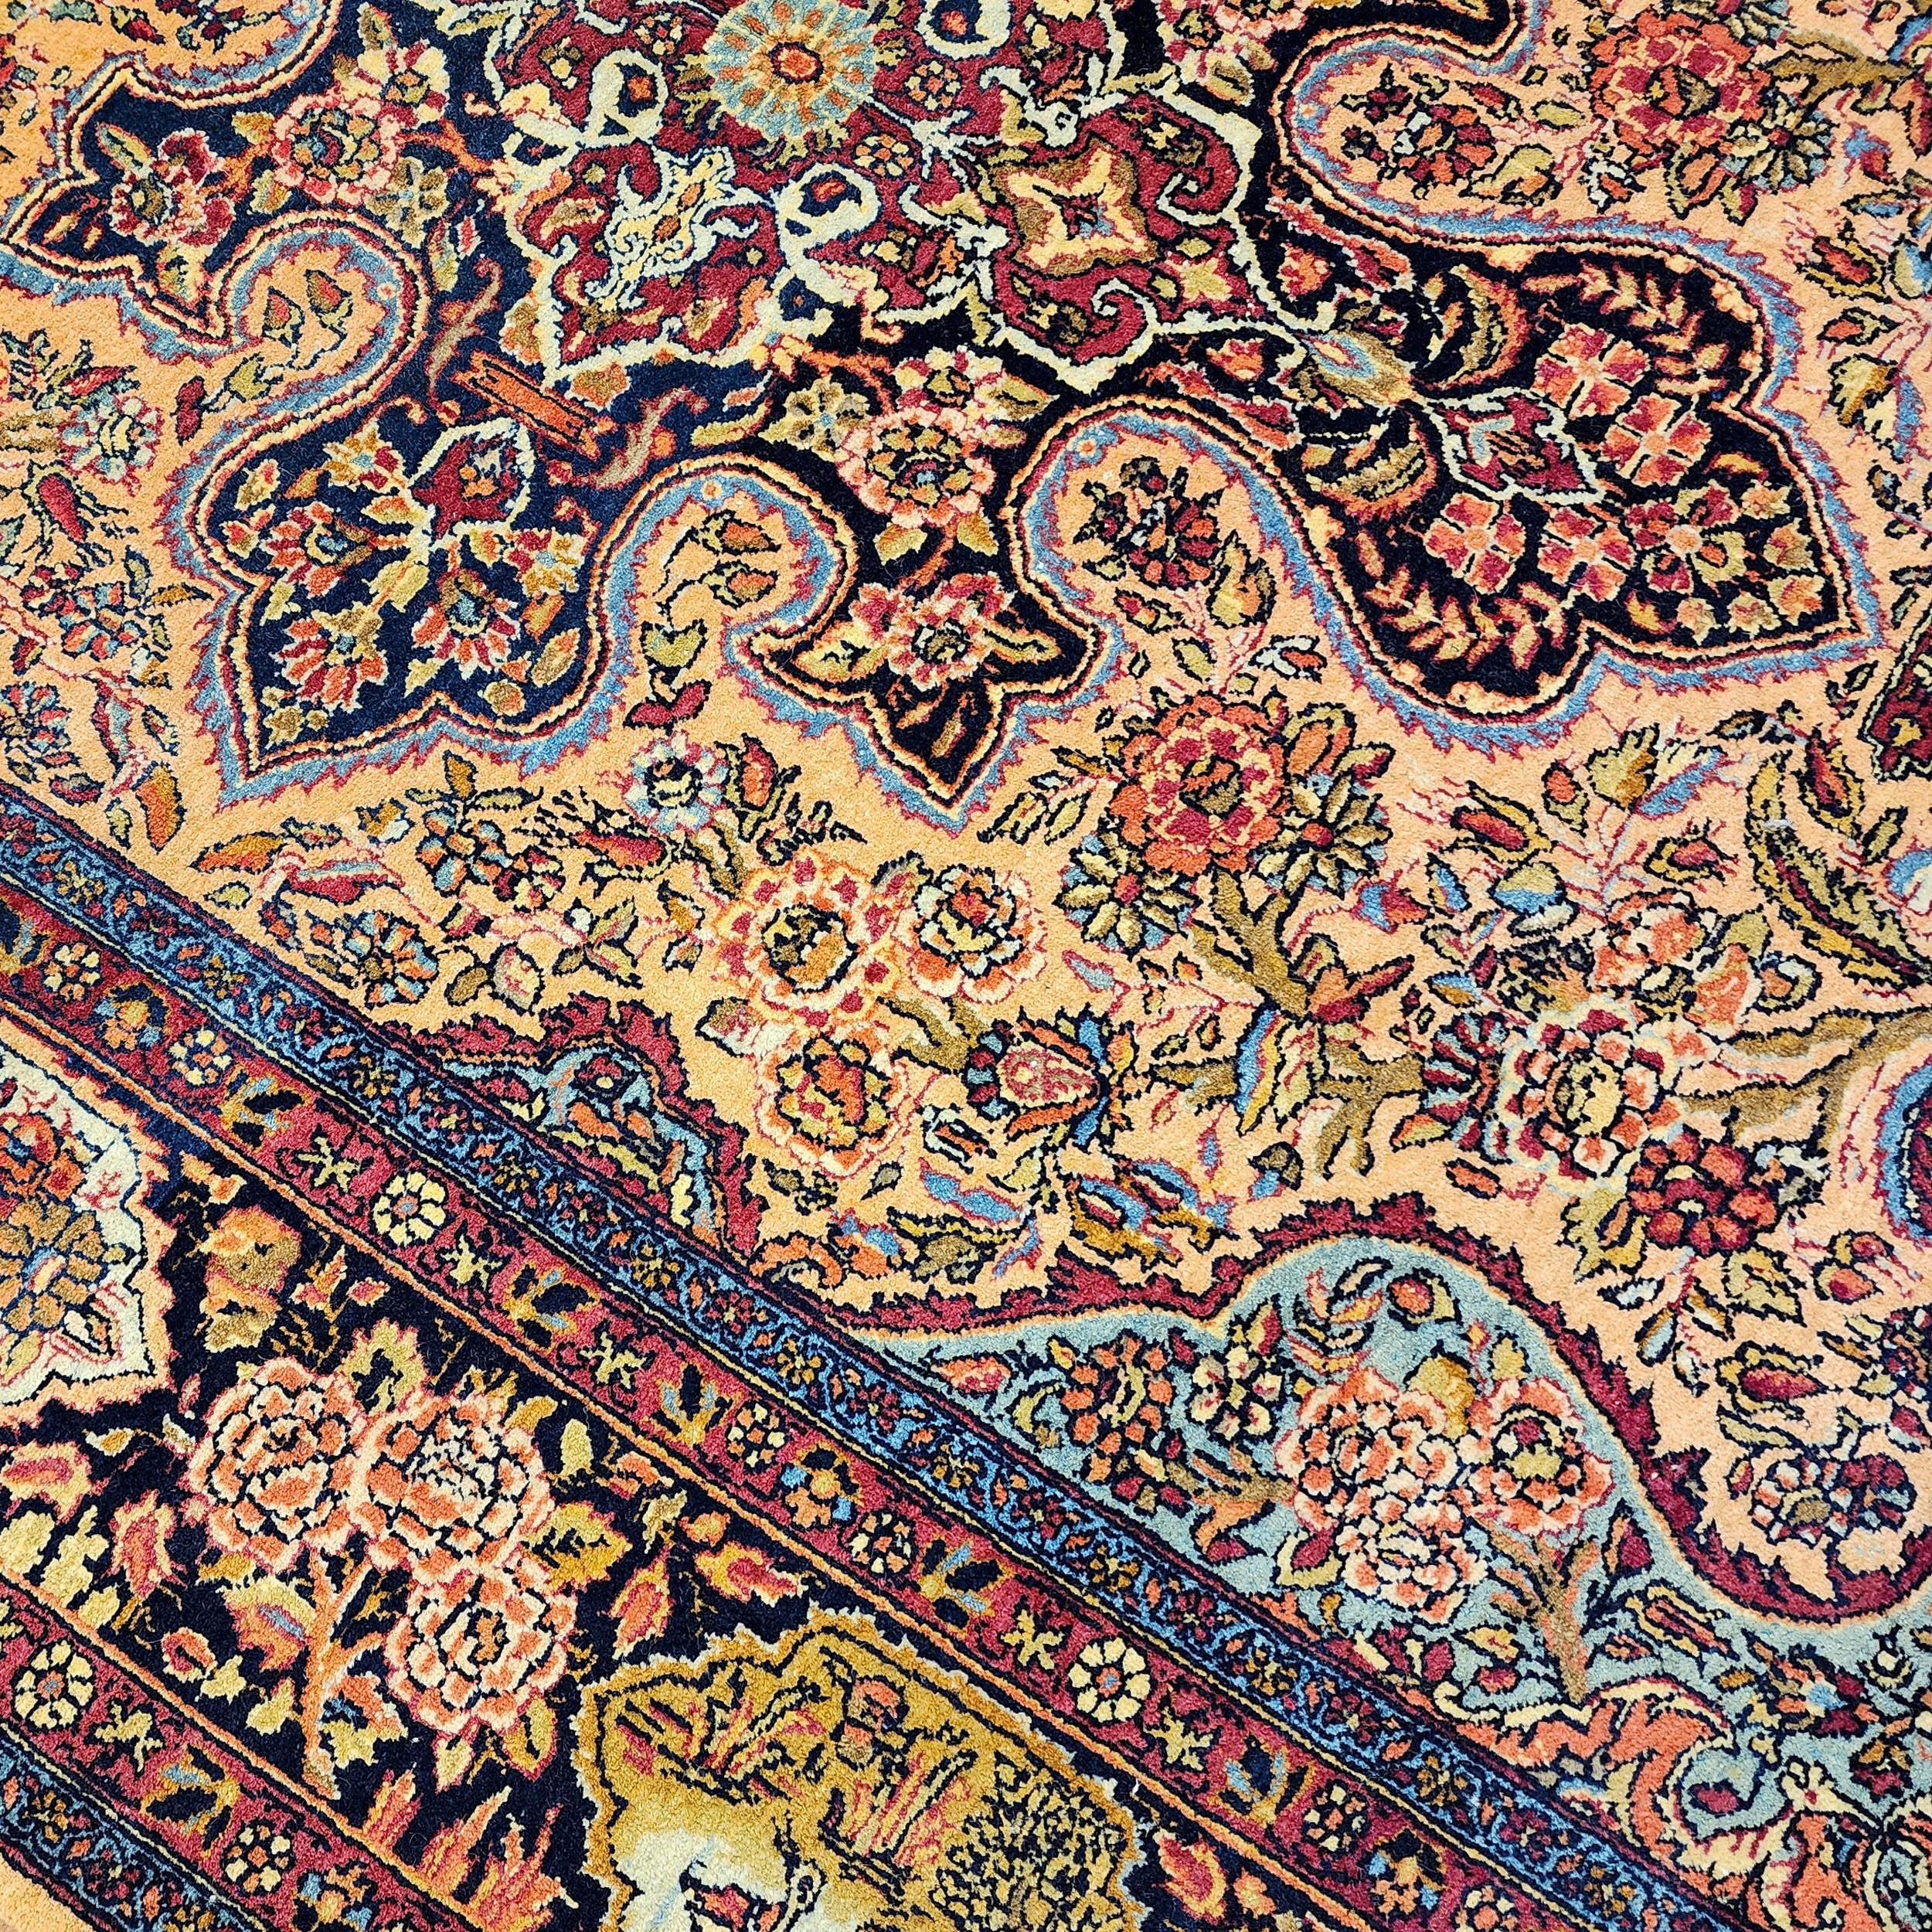 This exceptional antique Persian rug is a masterpiece of fine handwoven artistry, featuring the luxurious combination of Kashan wool in a striking gold and navy color palette. With meticulous craftsmanship, the rug measures 4 feet 6 inches by 6 feet